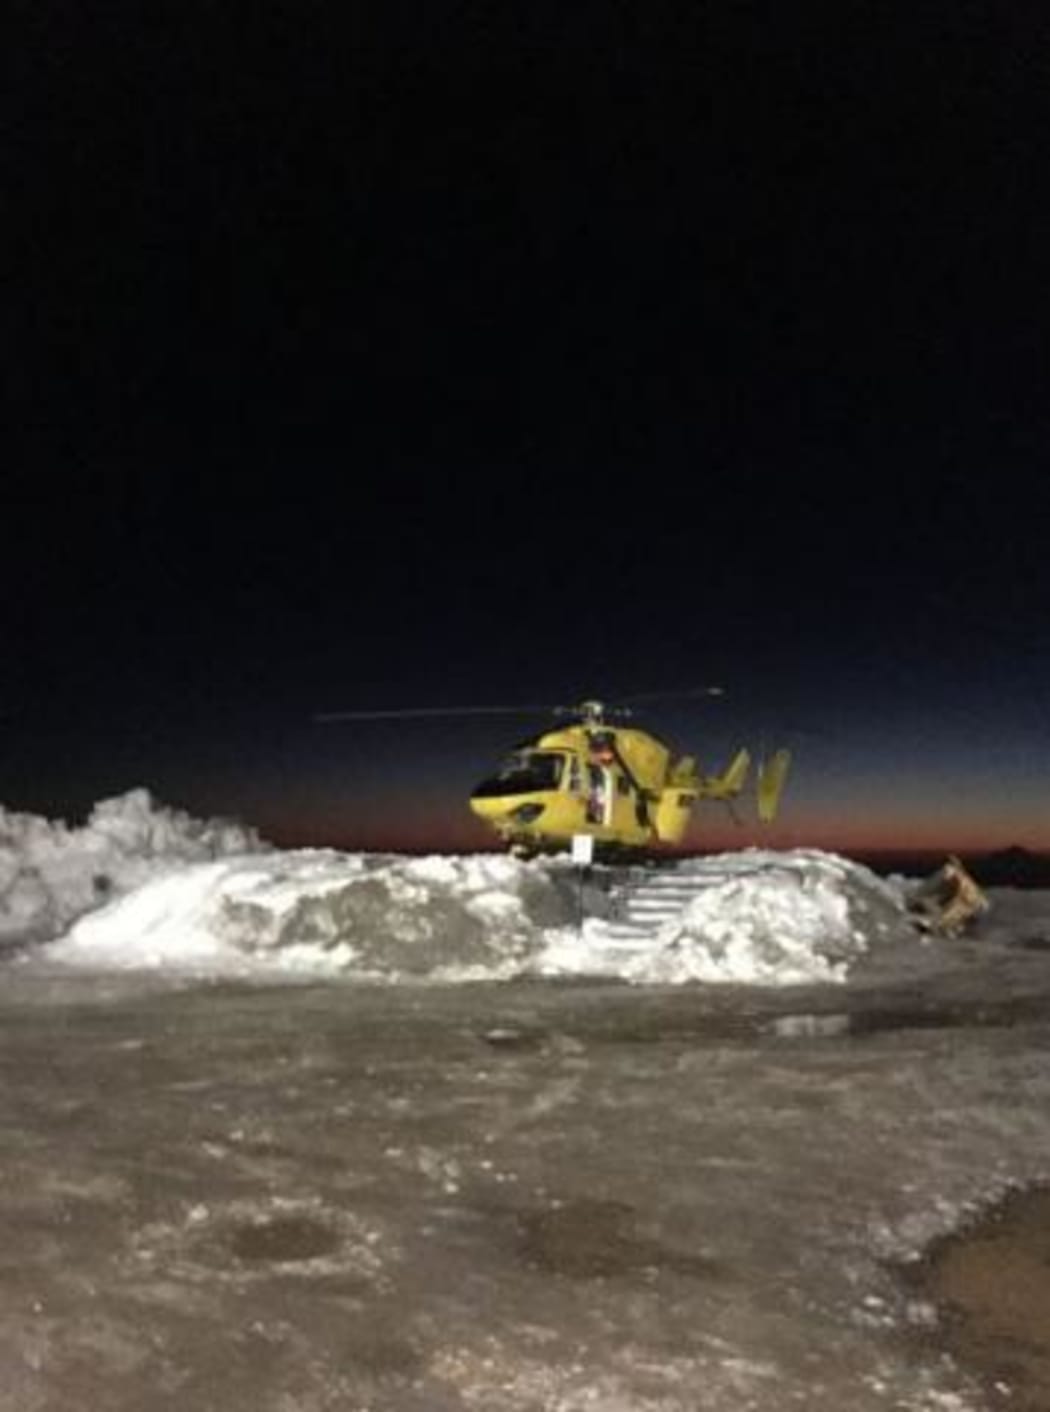 The man and three others were rescued last night.